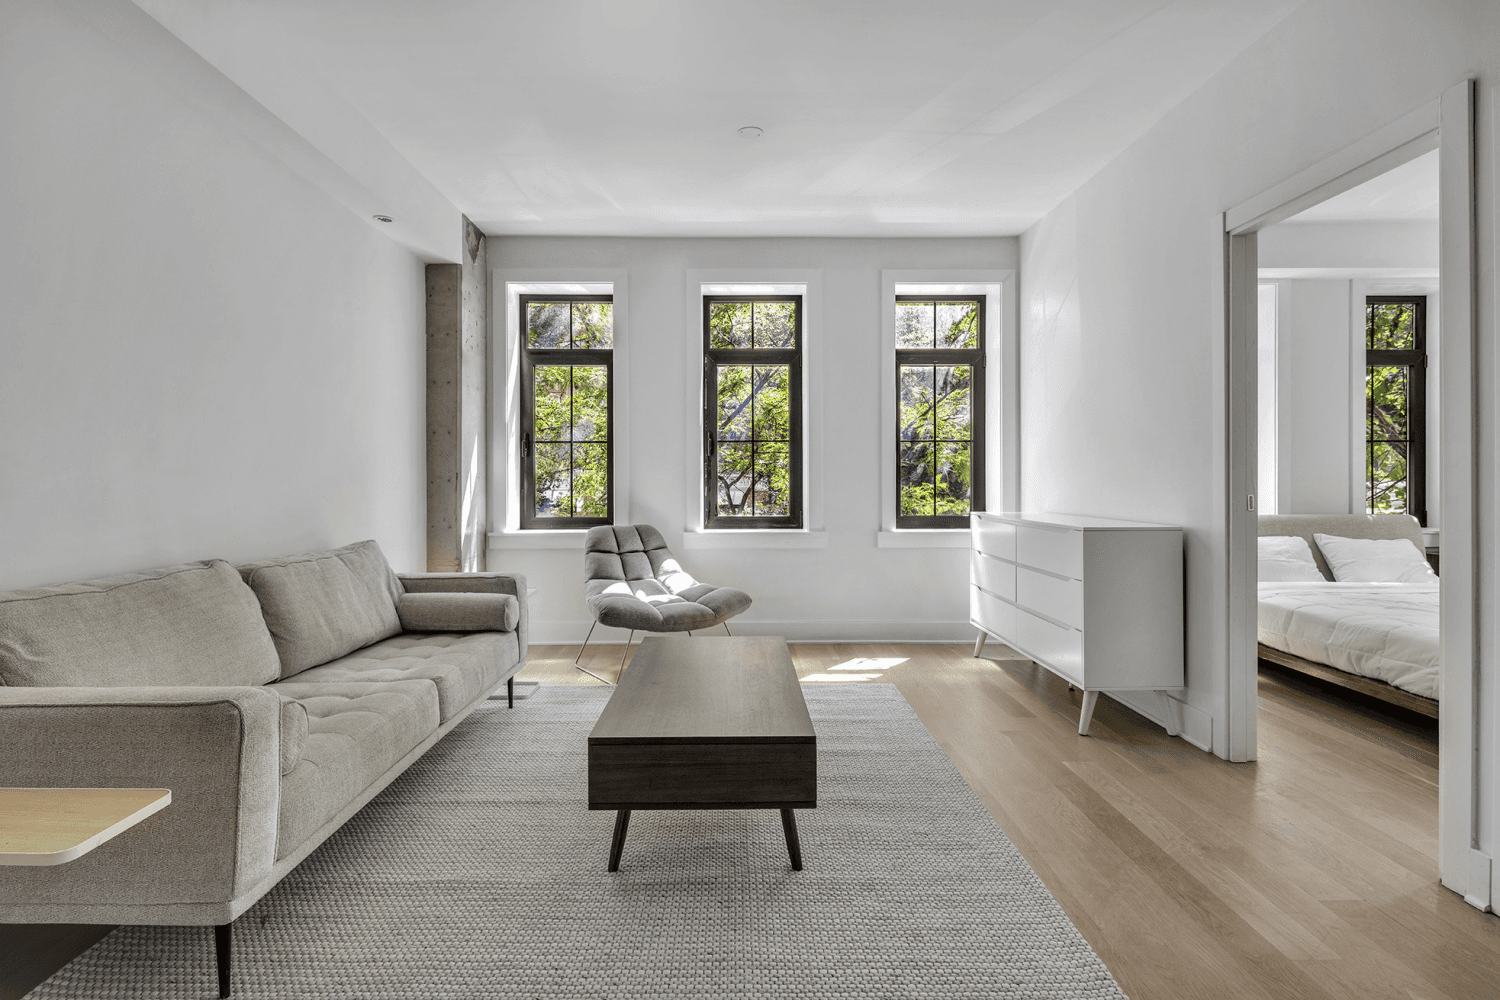 A block from Tompkins Square Park in the heart of the East Village awaits this bespoke luxury condo from Isaac amp ; Stern Architects.